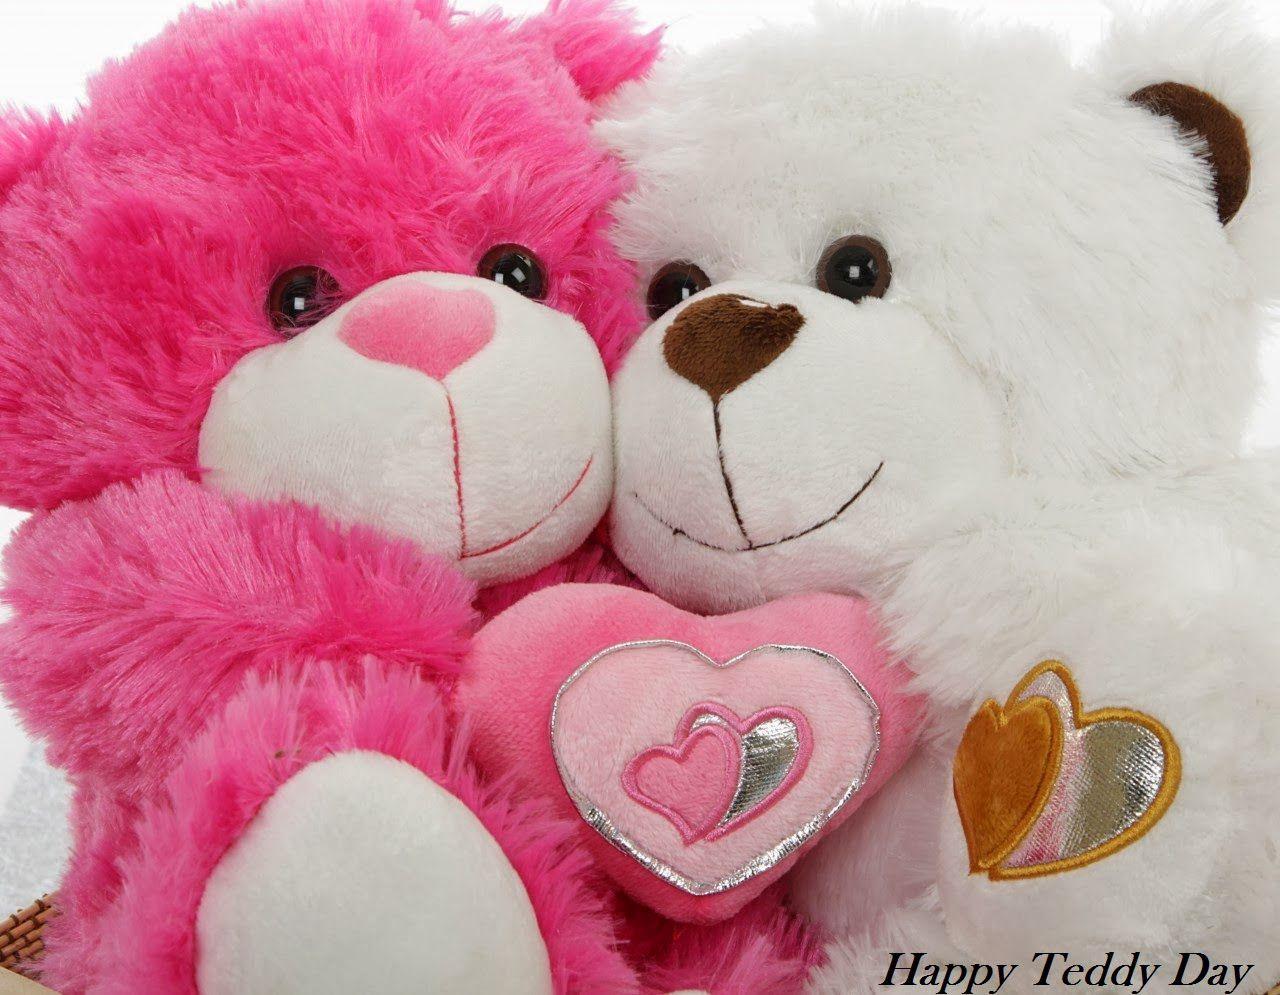 teddy wallpaper • ShareChat Photos and Videos